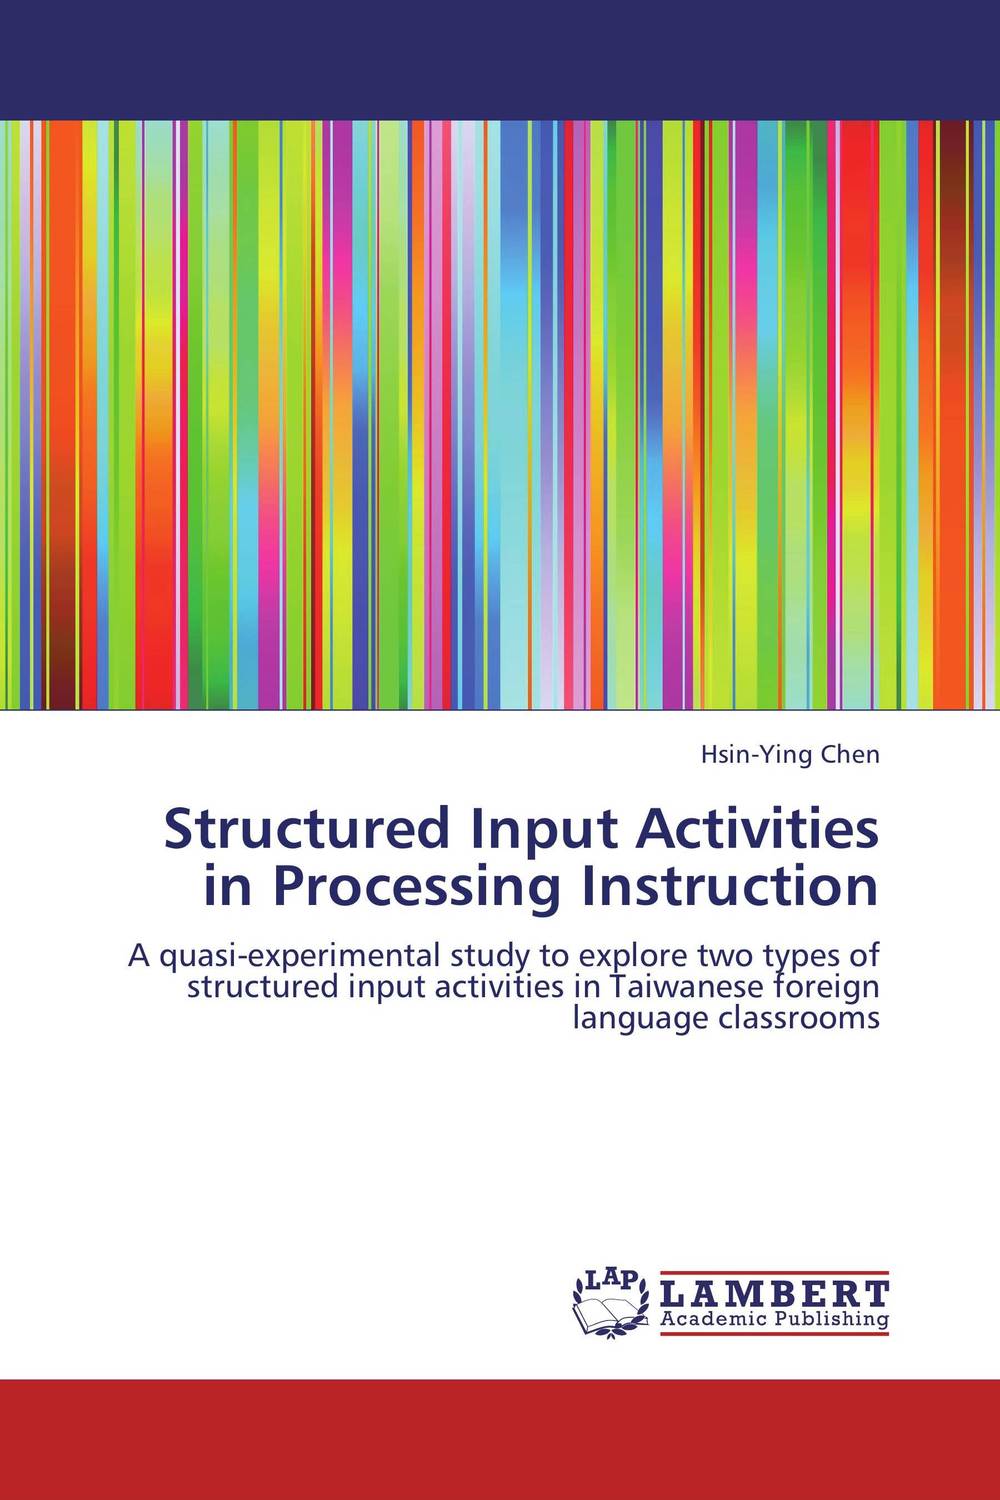 Structured Input Activities in Processing Instruction